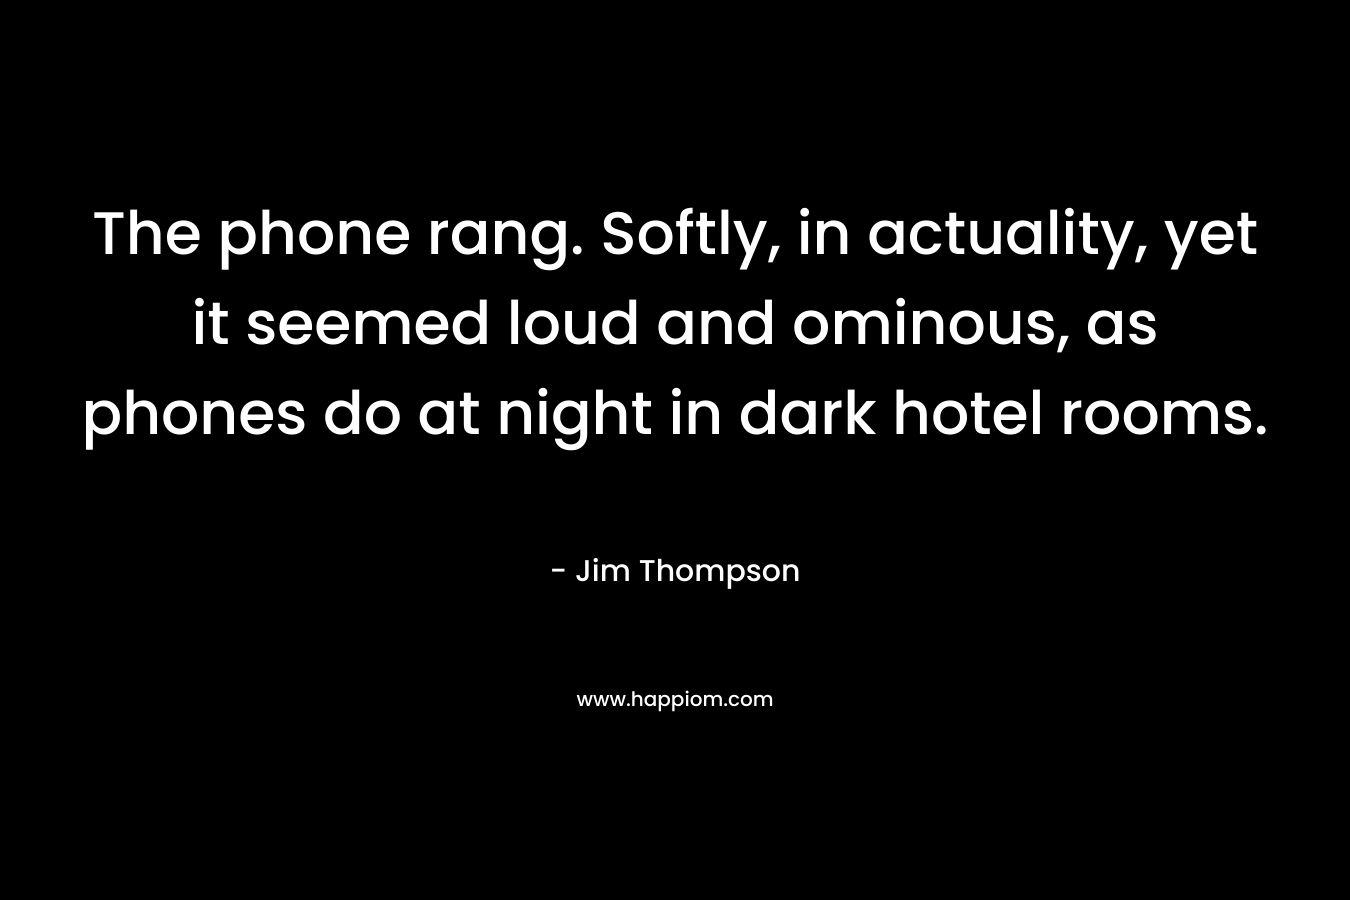 The phone rang. Softly, in actuality, yet it seemed loud and ominous, as phones do at night in dark hotel rooms.